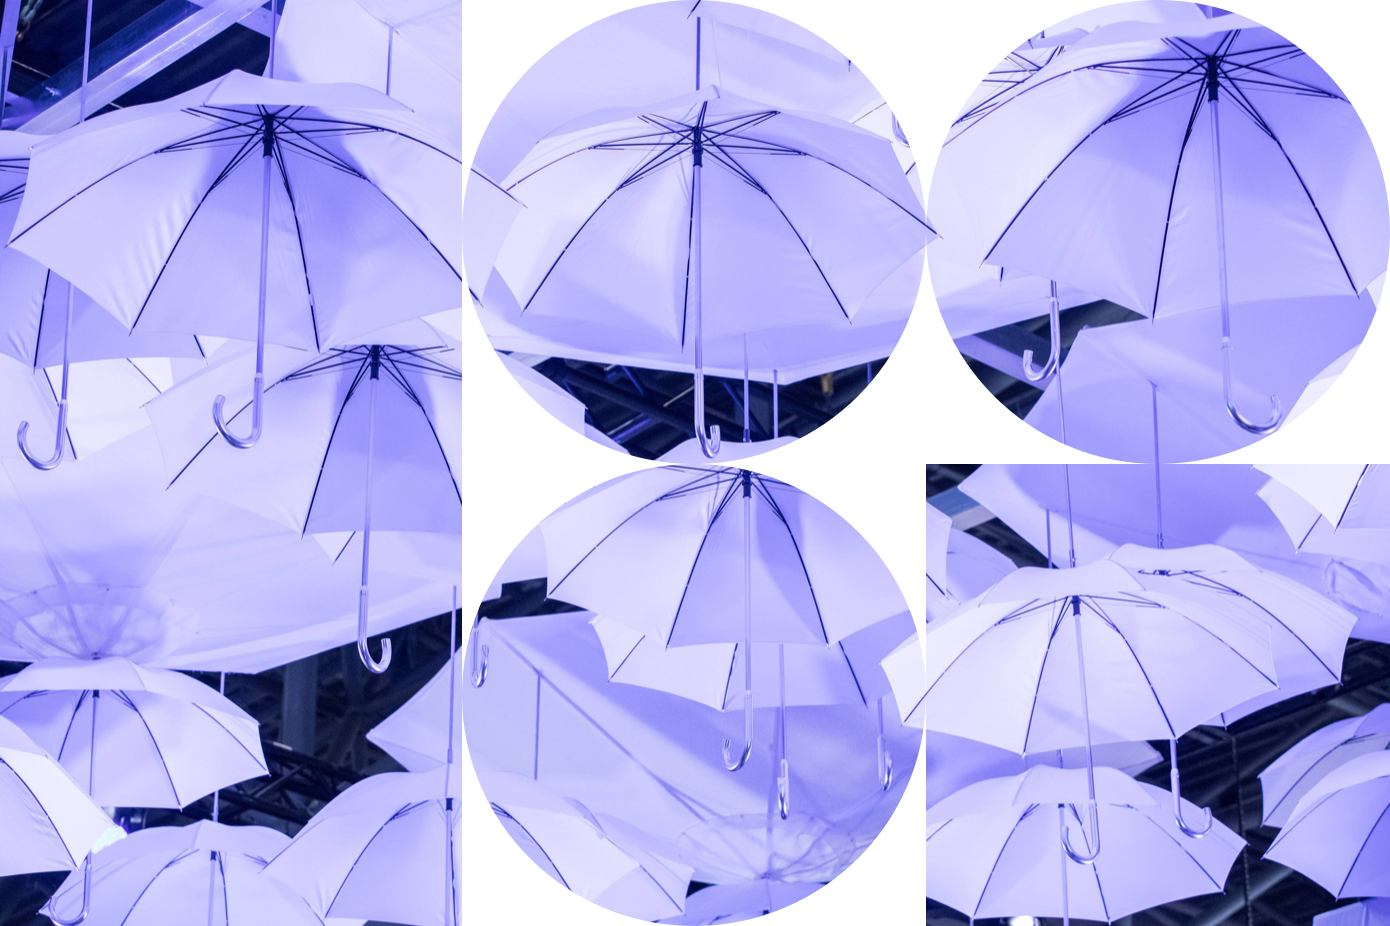 Purple umbrellas creating a pattern for IBM's NRF booth in 2018..